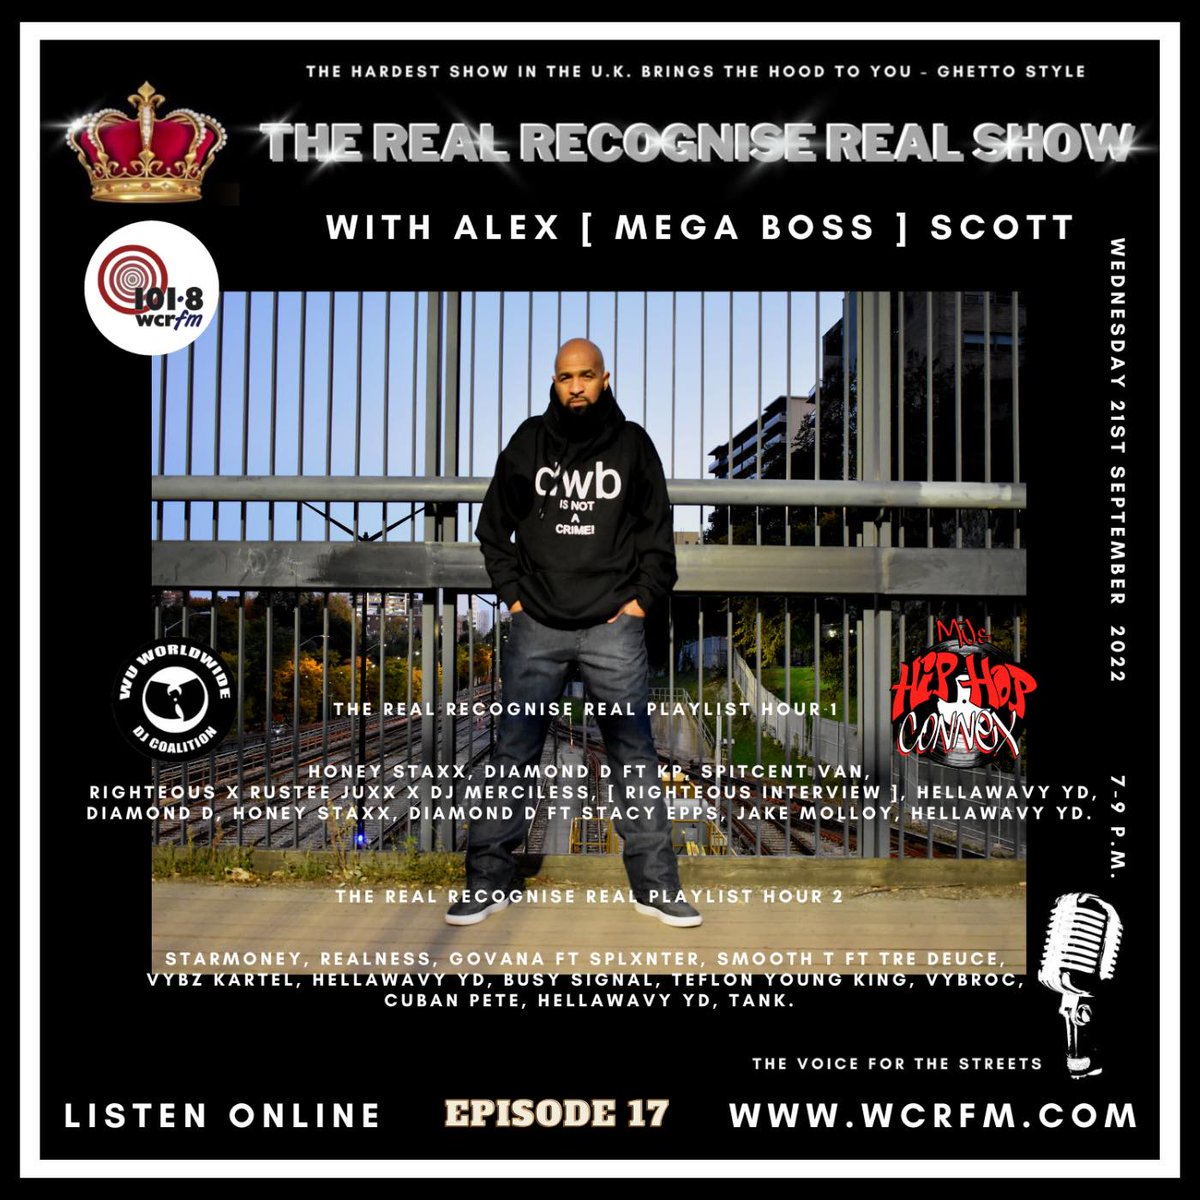 Catch Righteous on The Real Recognise Real Show tomorrow at 2:00 pm EST!
WCRFM 101.8
United Kingdom with DJ Megaboss (WU Worldwide DJ Coalition)
wcrfm.com